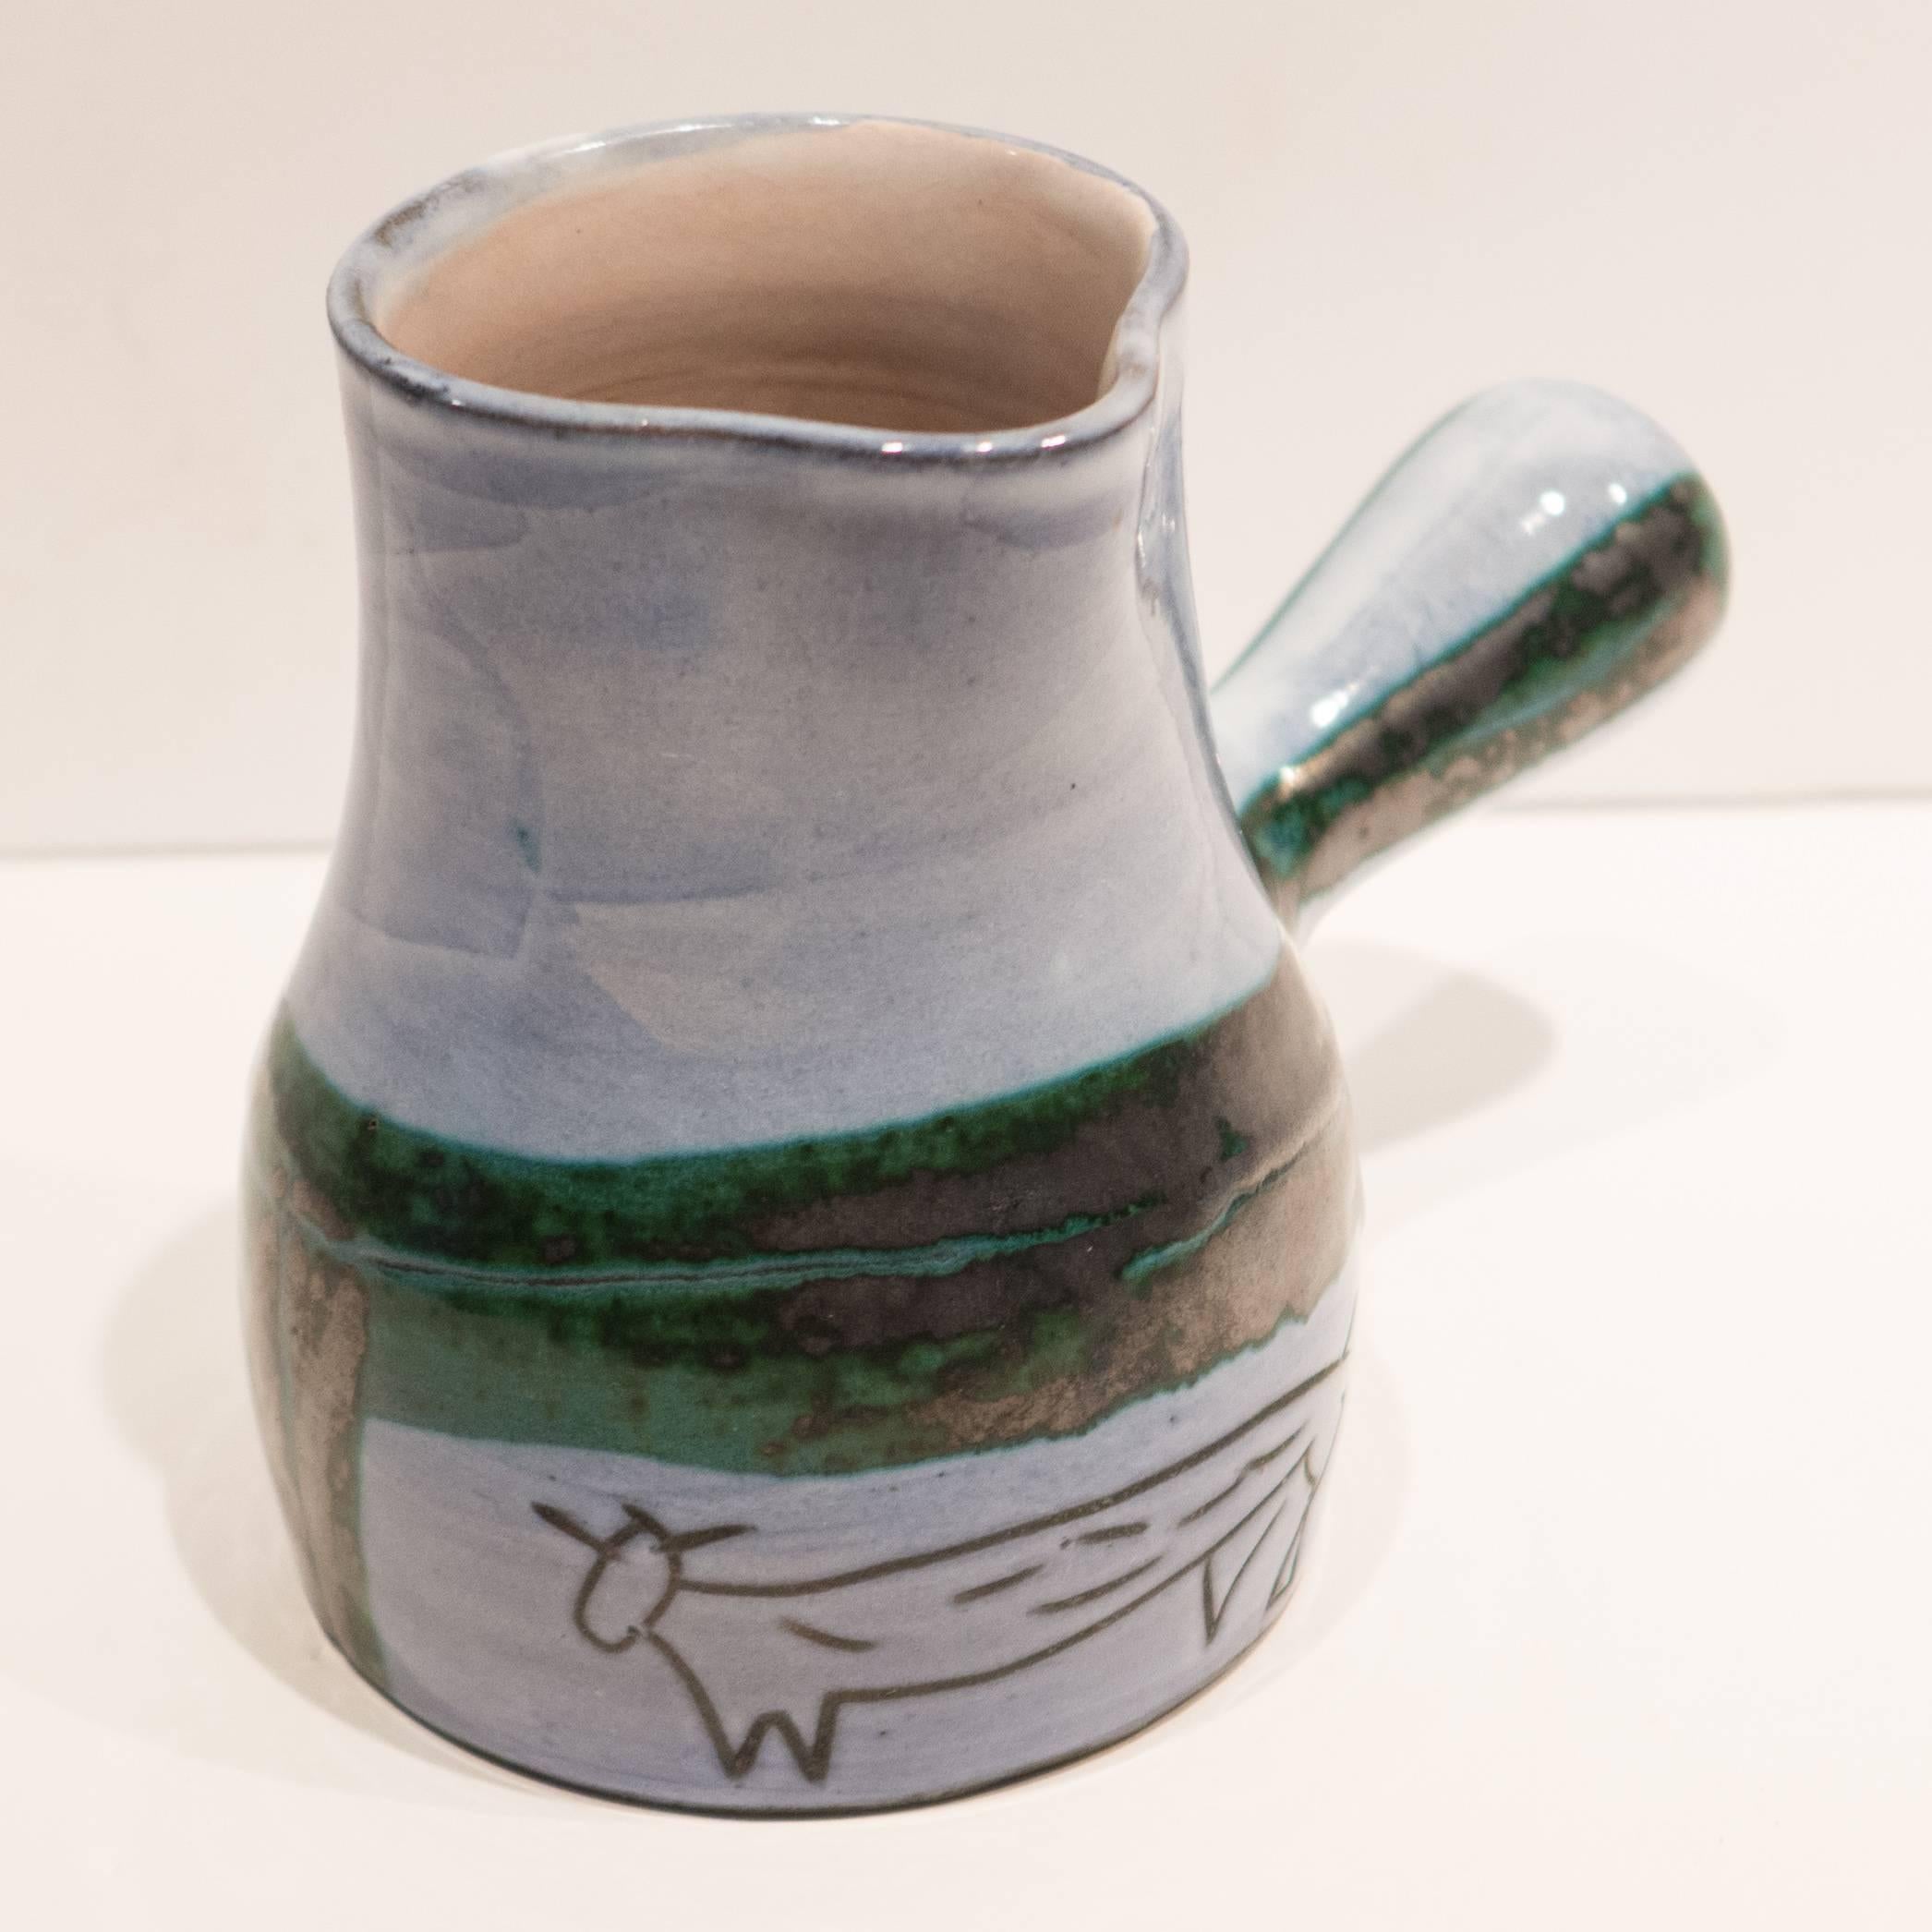 Small glazed earthenware milk pitcher or creamer with handle and incised abstract bovine images, by renowned Vallauris ceramic artist Jacques Innocenti (1926-1958). Signature to bottom.